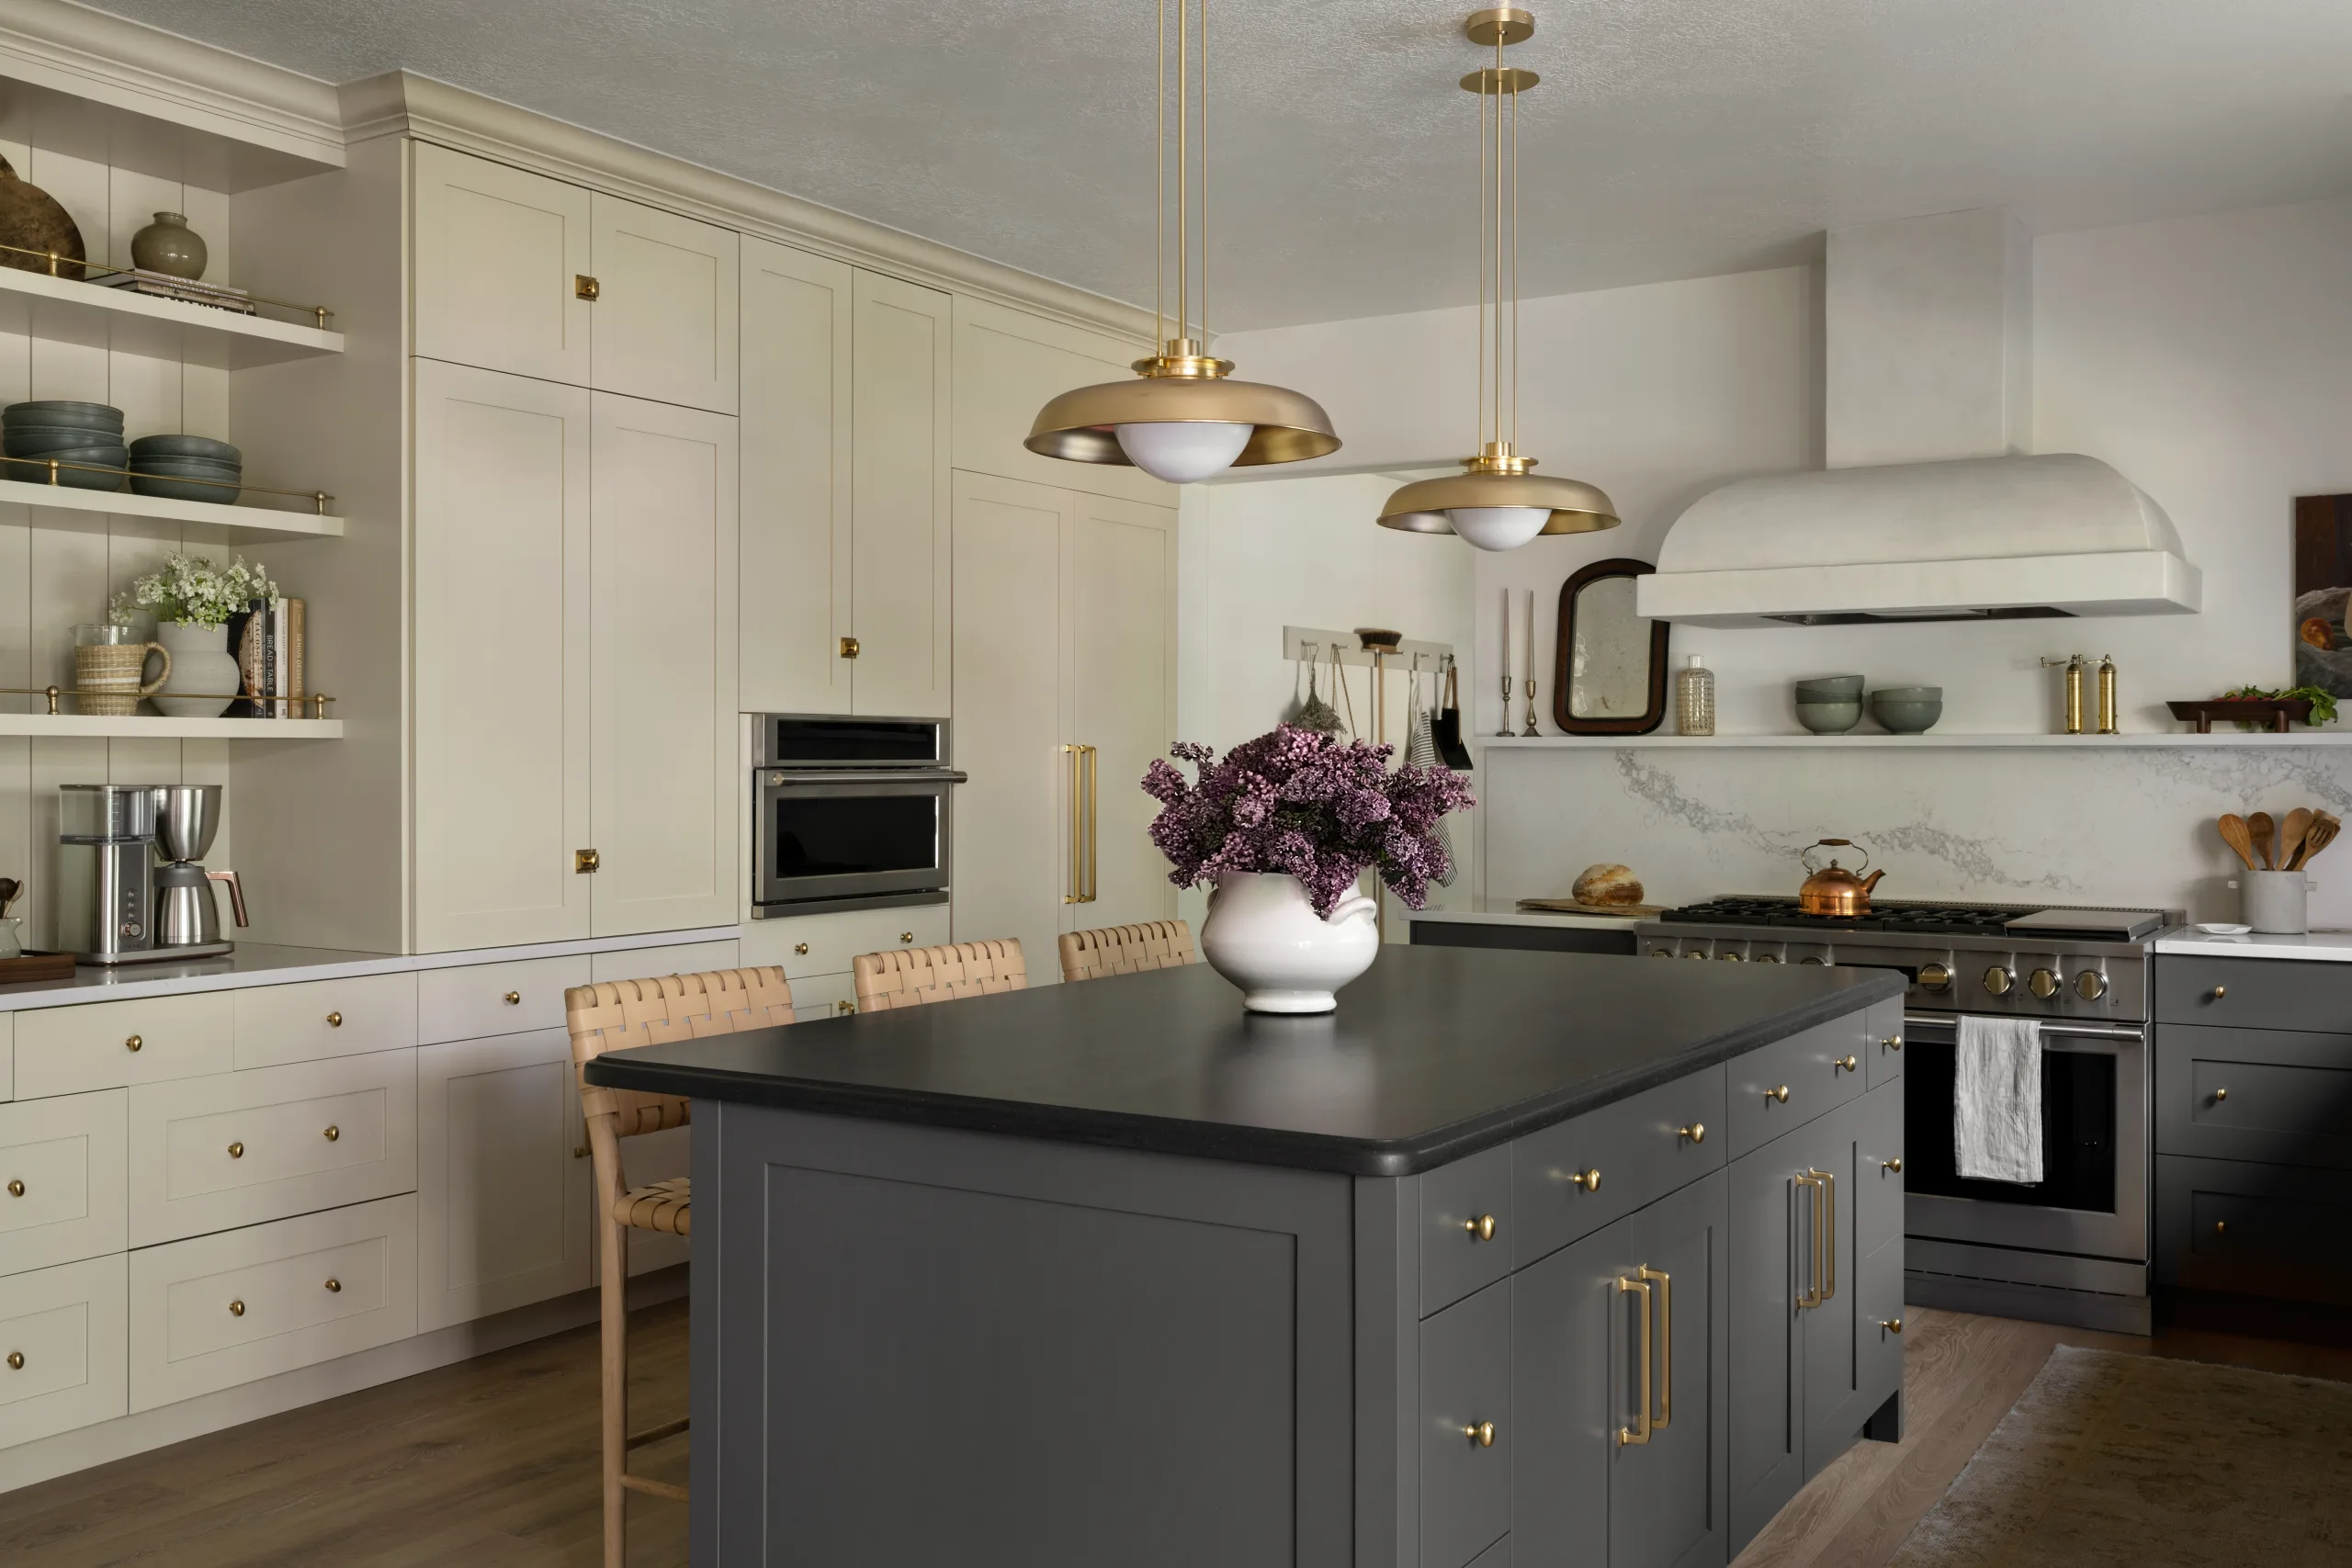 Creamy cupboard fronts, with gold pendant lighting and leather wrap barstools